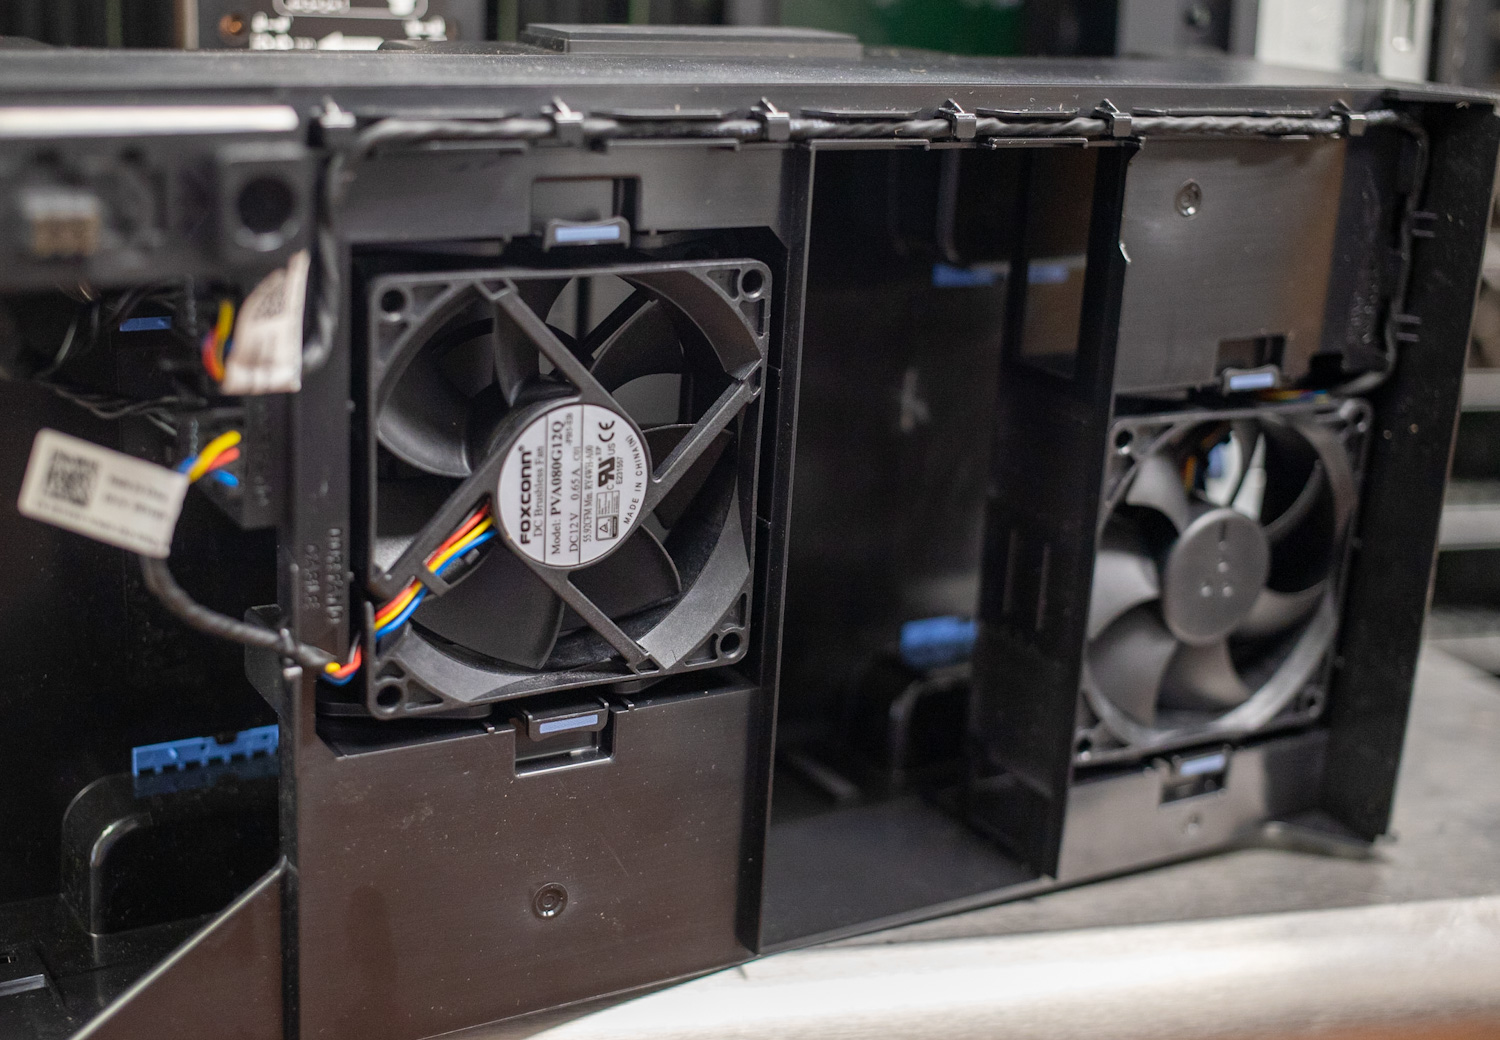 View of the Cooling solution for the Precision 7960